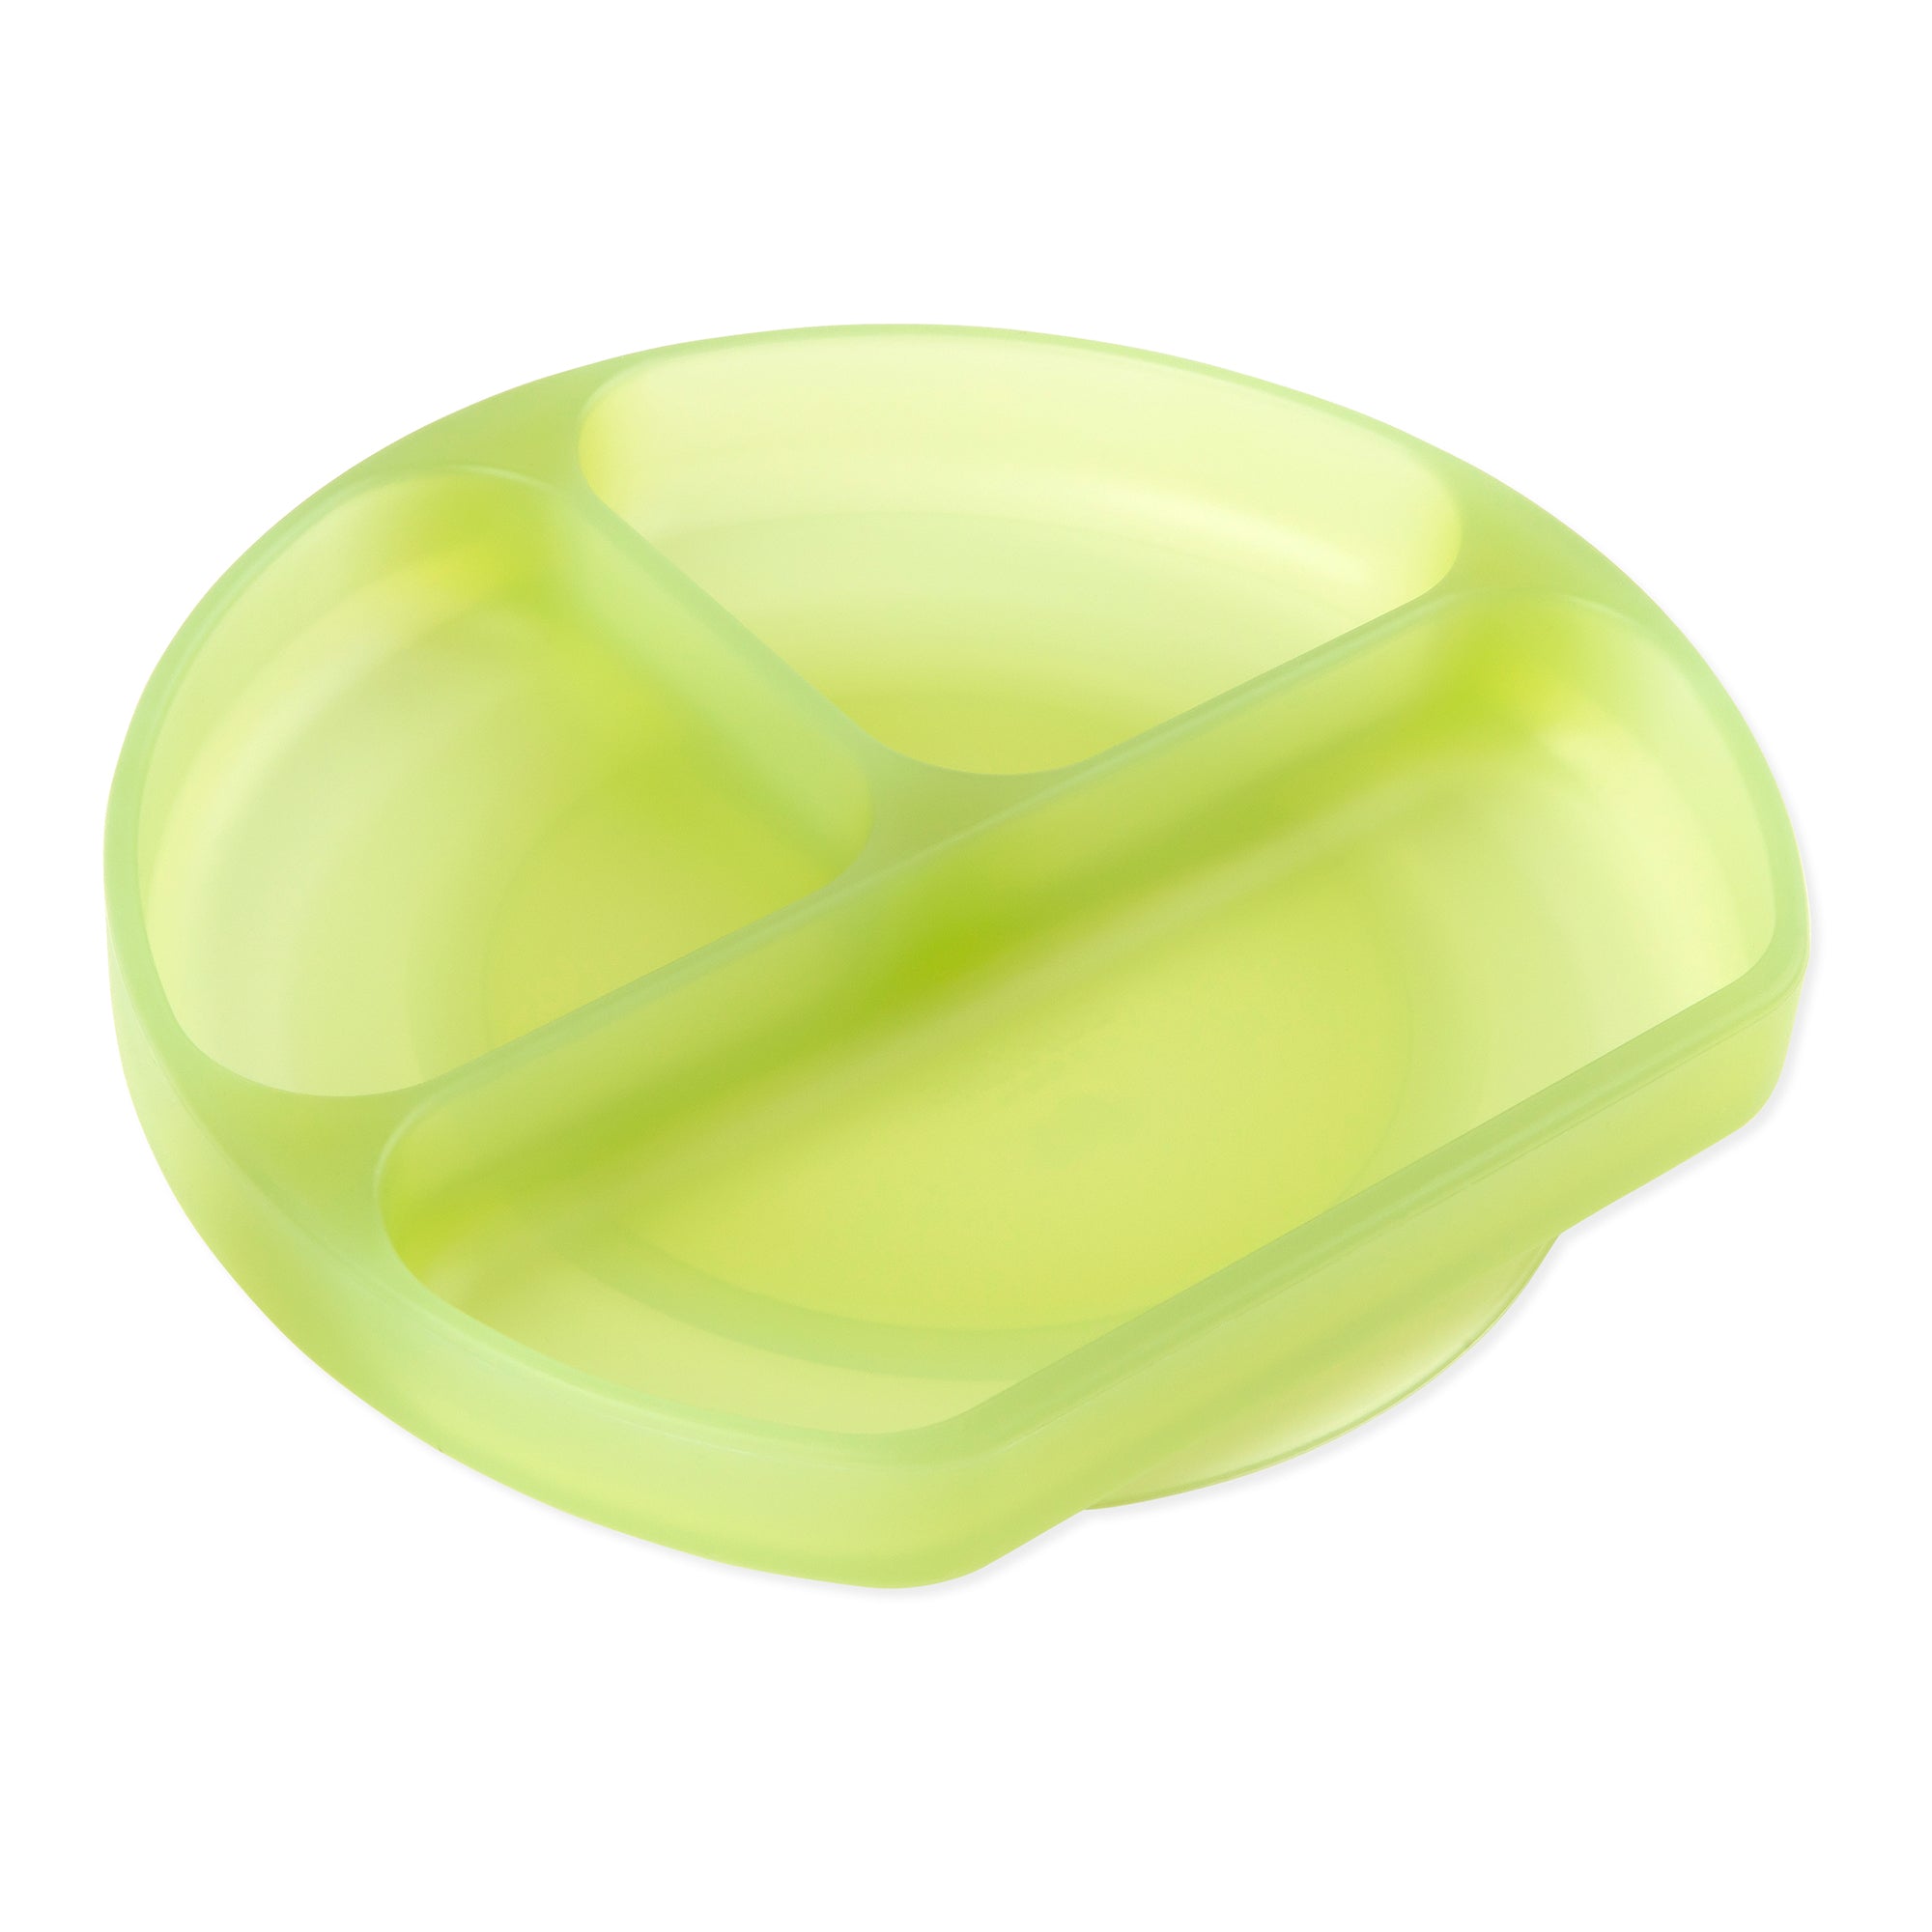 Silicone Grip Dish: Green Jelly